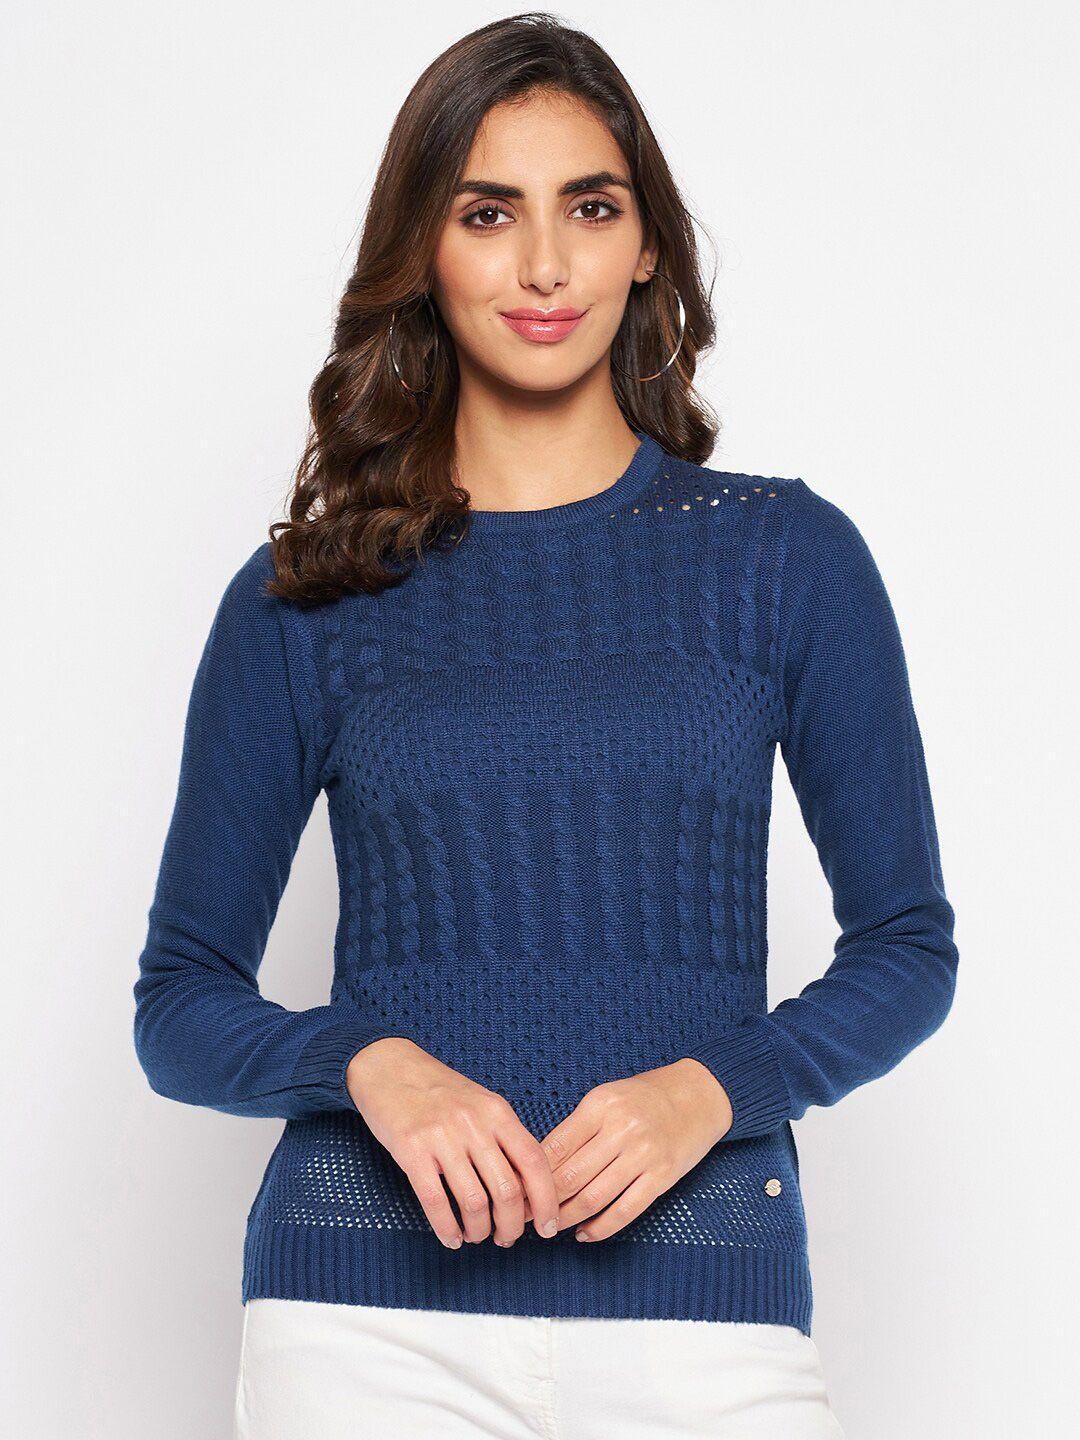 Crozo By Cantabil Women Acrylic Blue Cable Knit Pullover